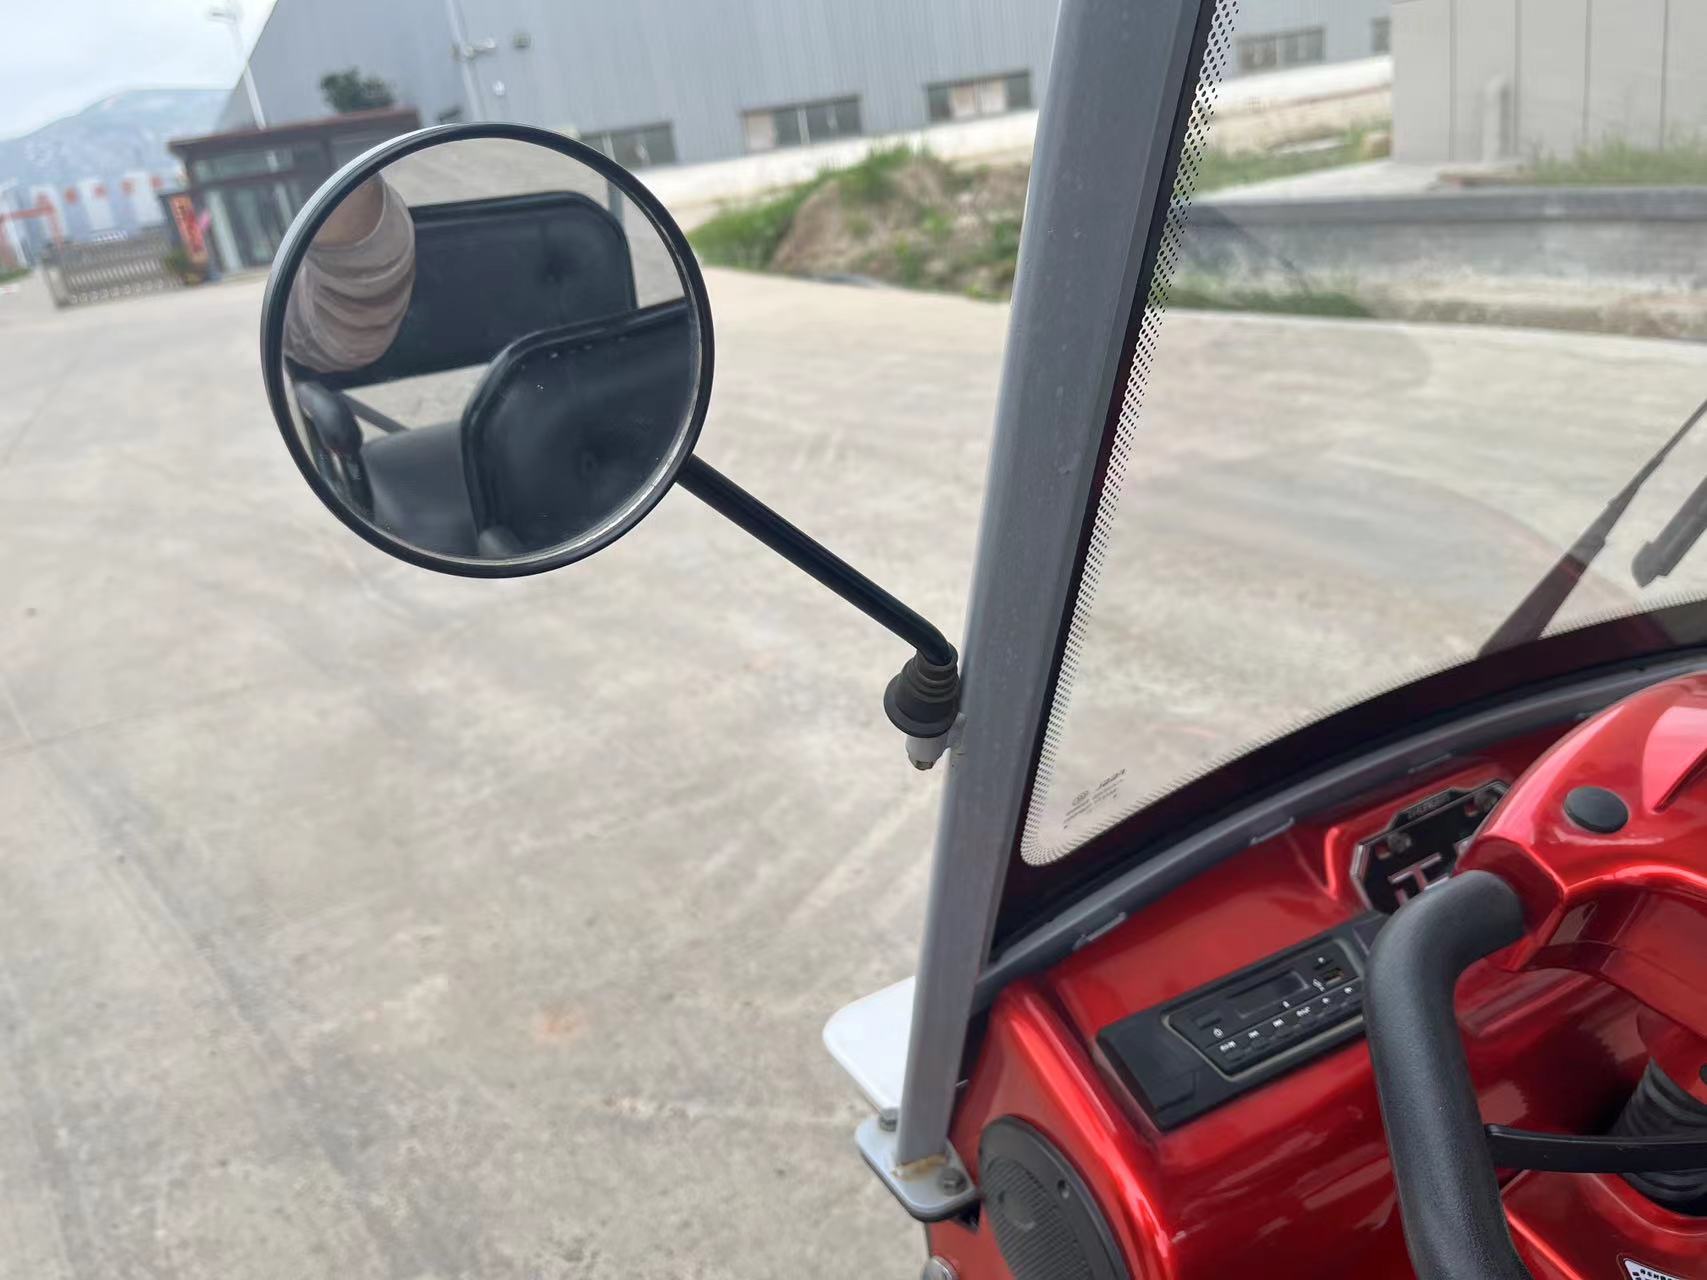 Two Seater Golf Cart Electric Sightseeing Vehicle